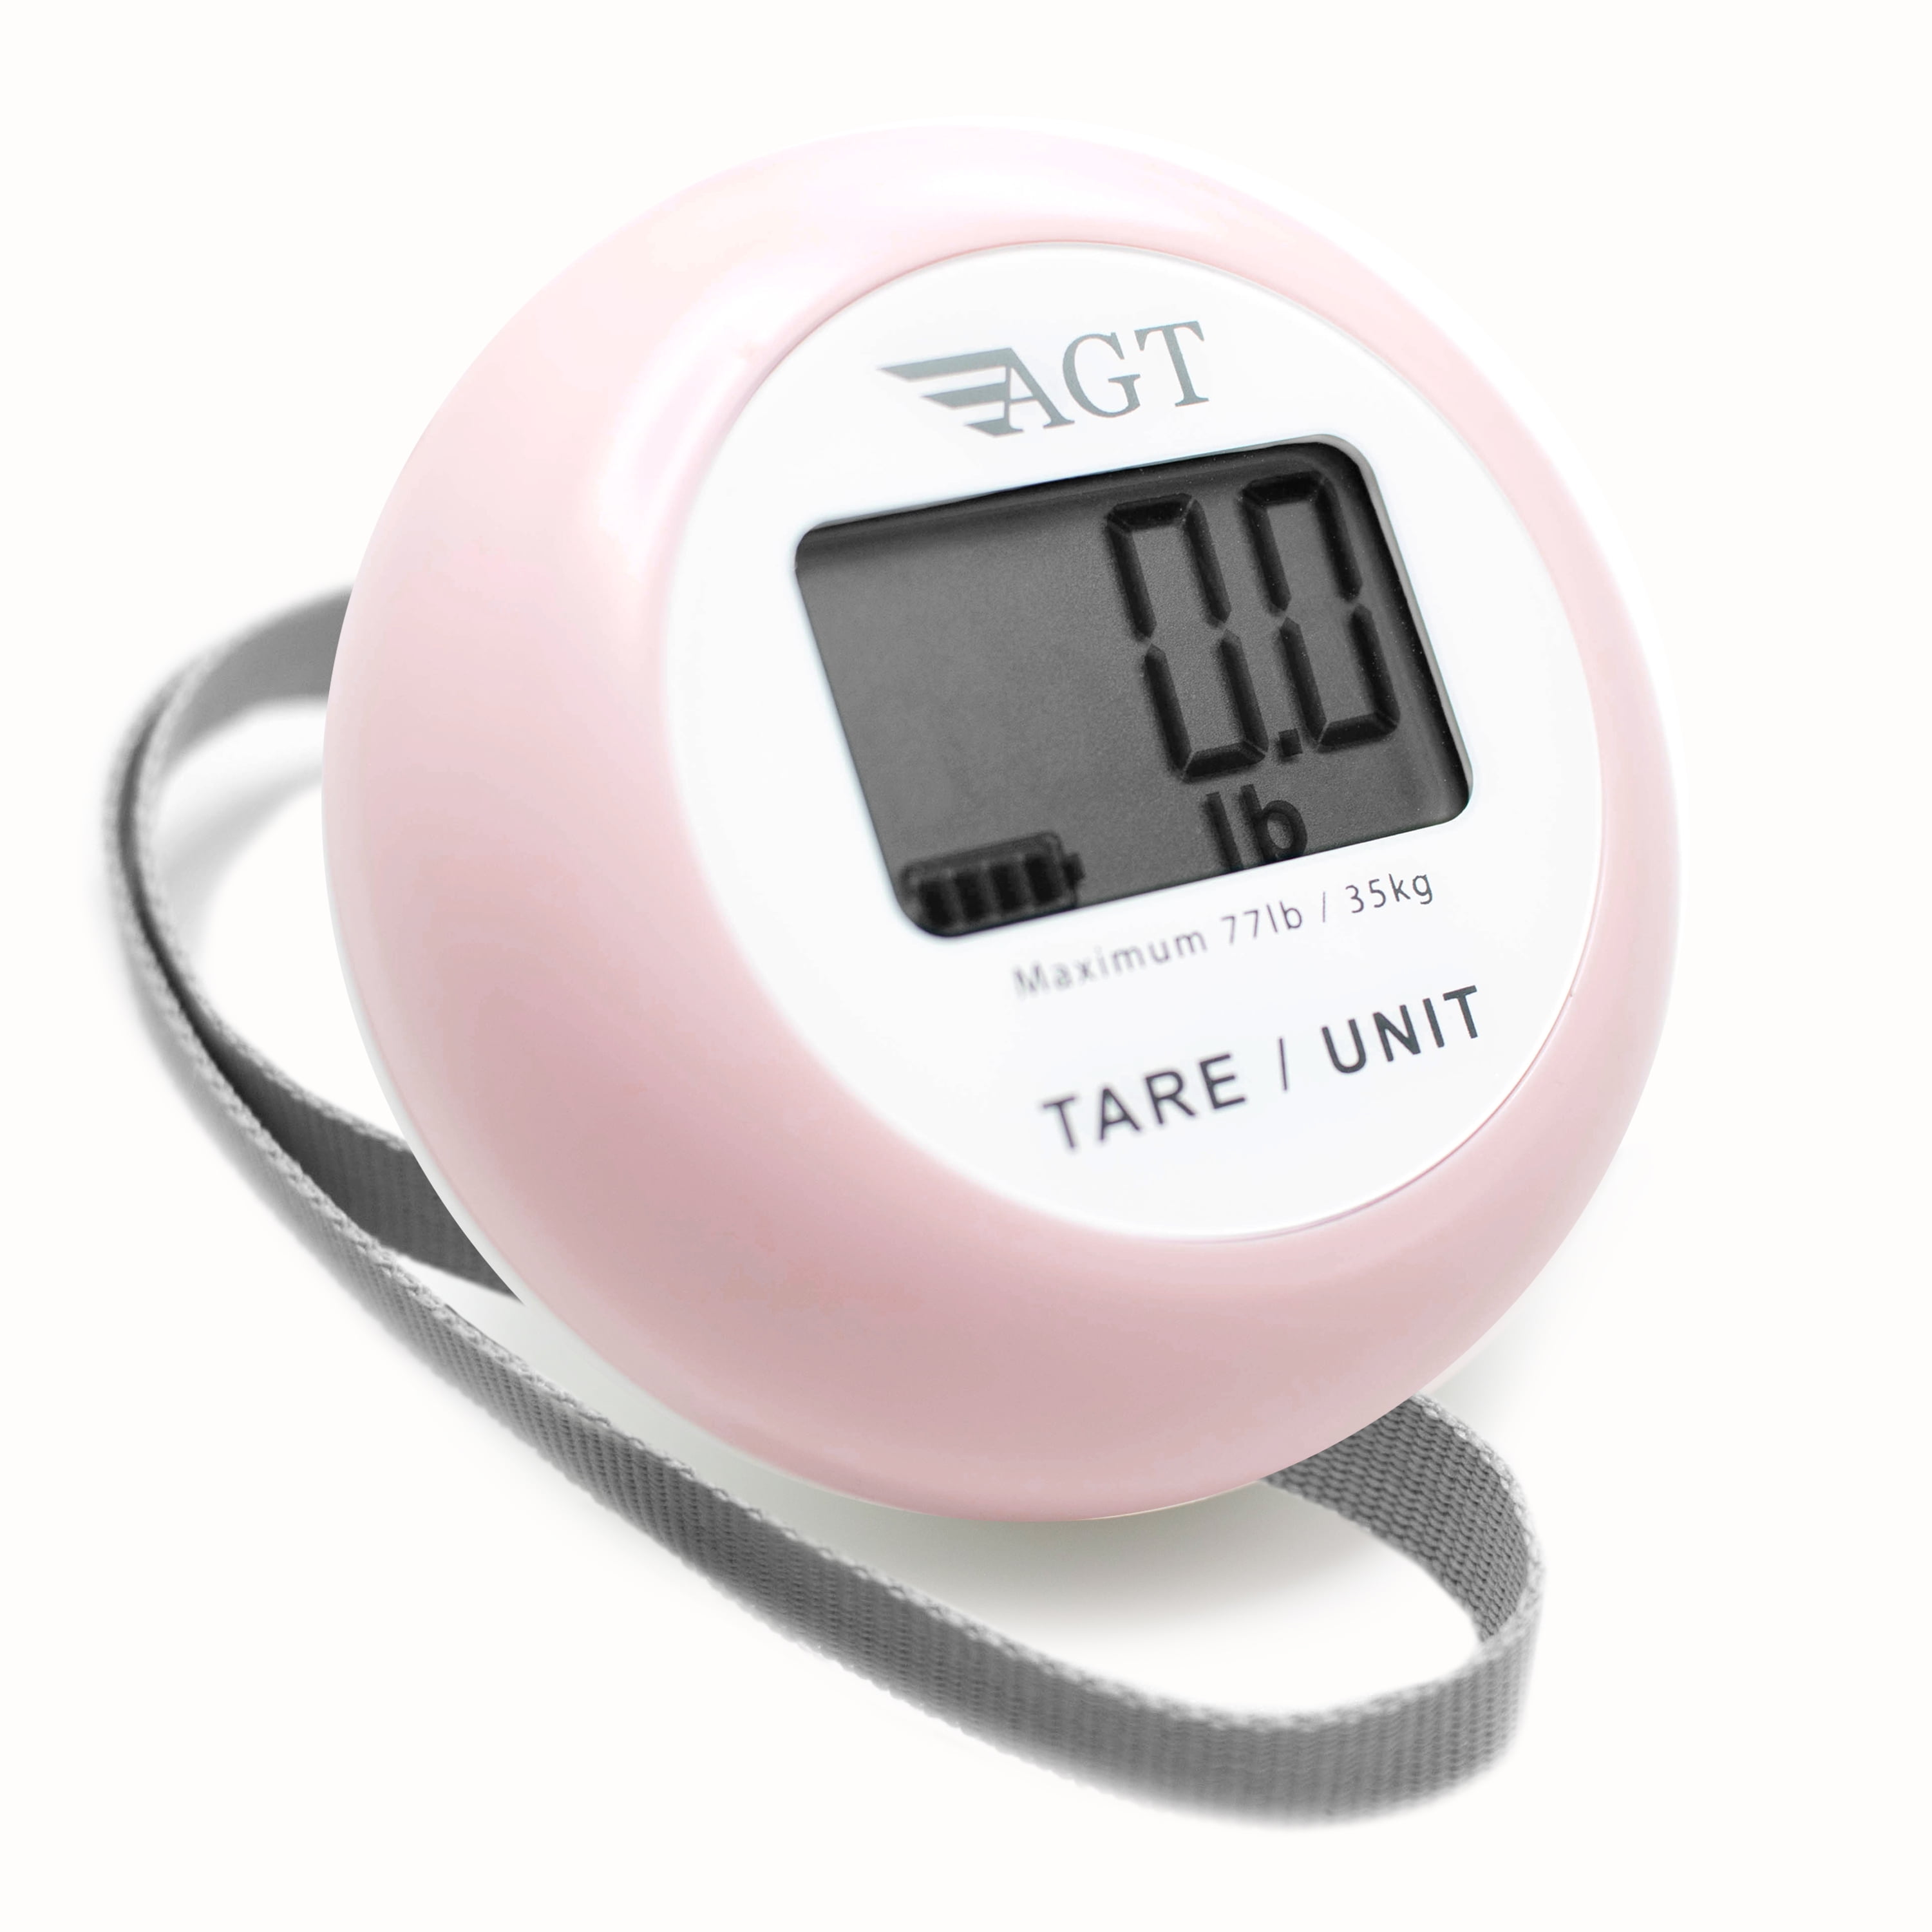 Battery-Free Portable Luggage Weighing Scale, Pink 